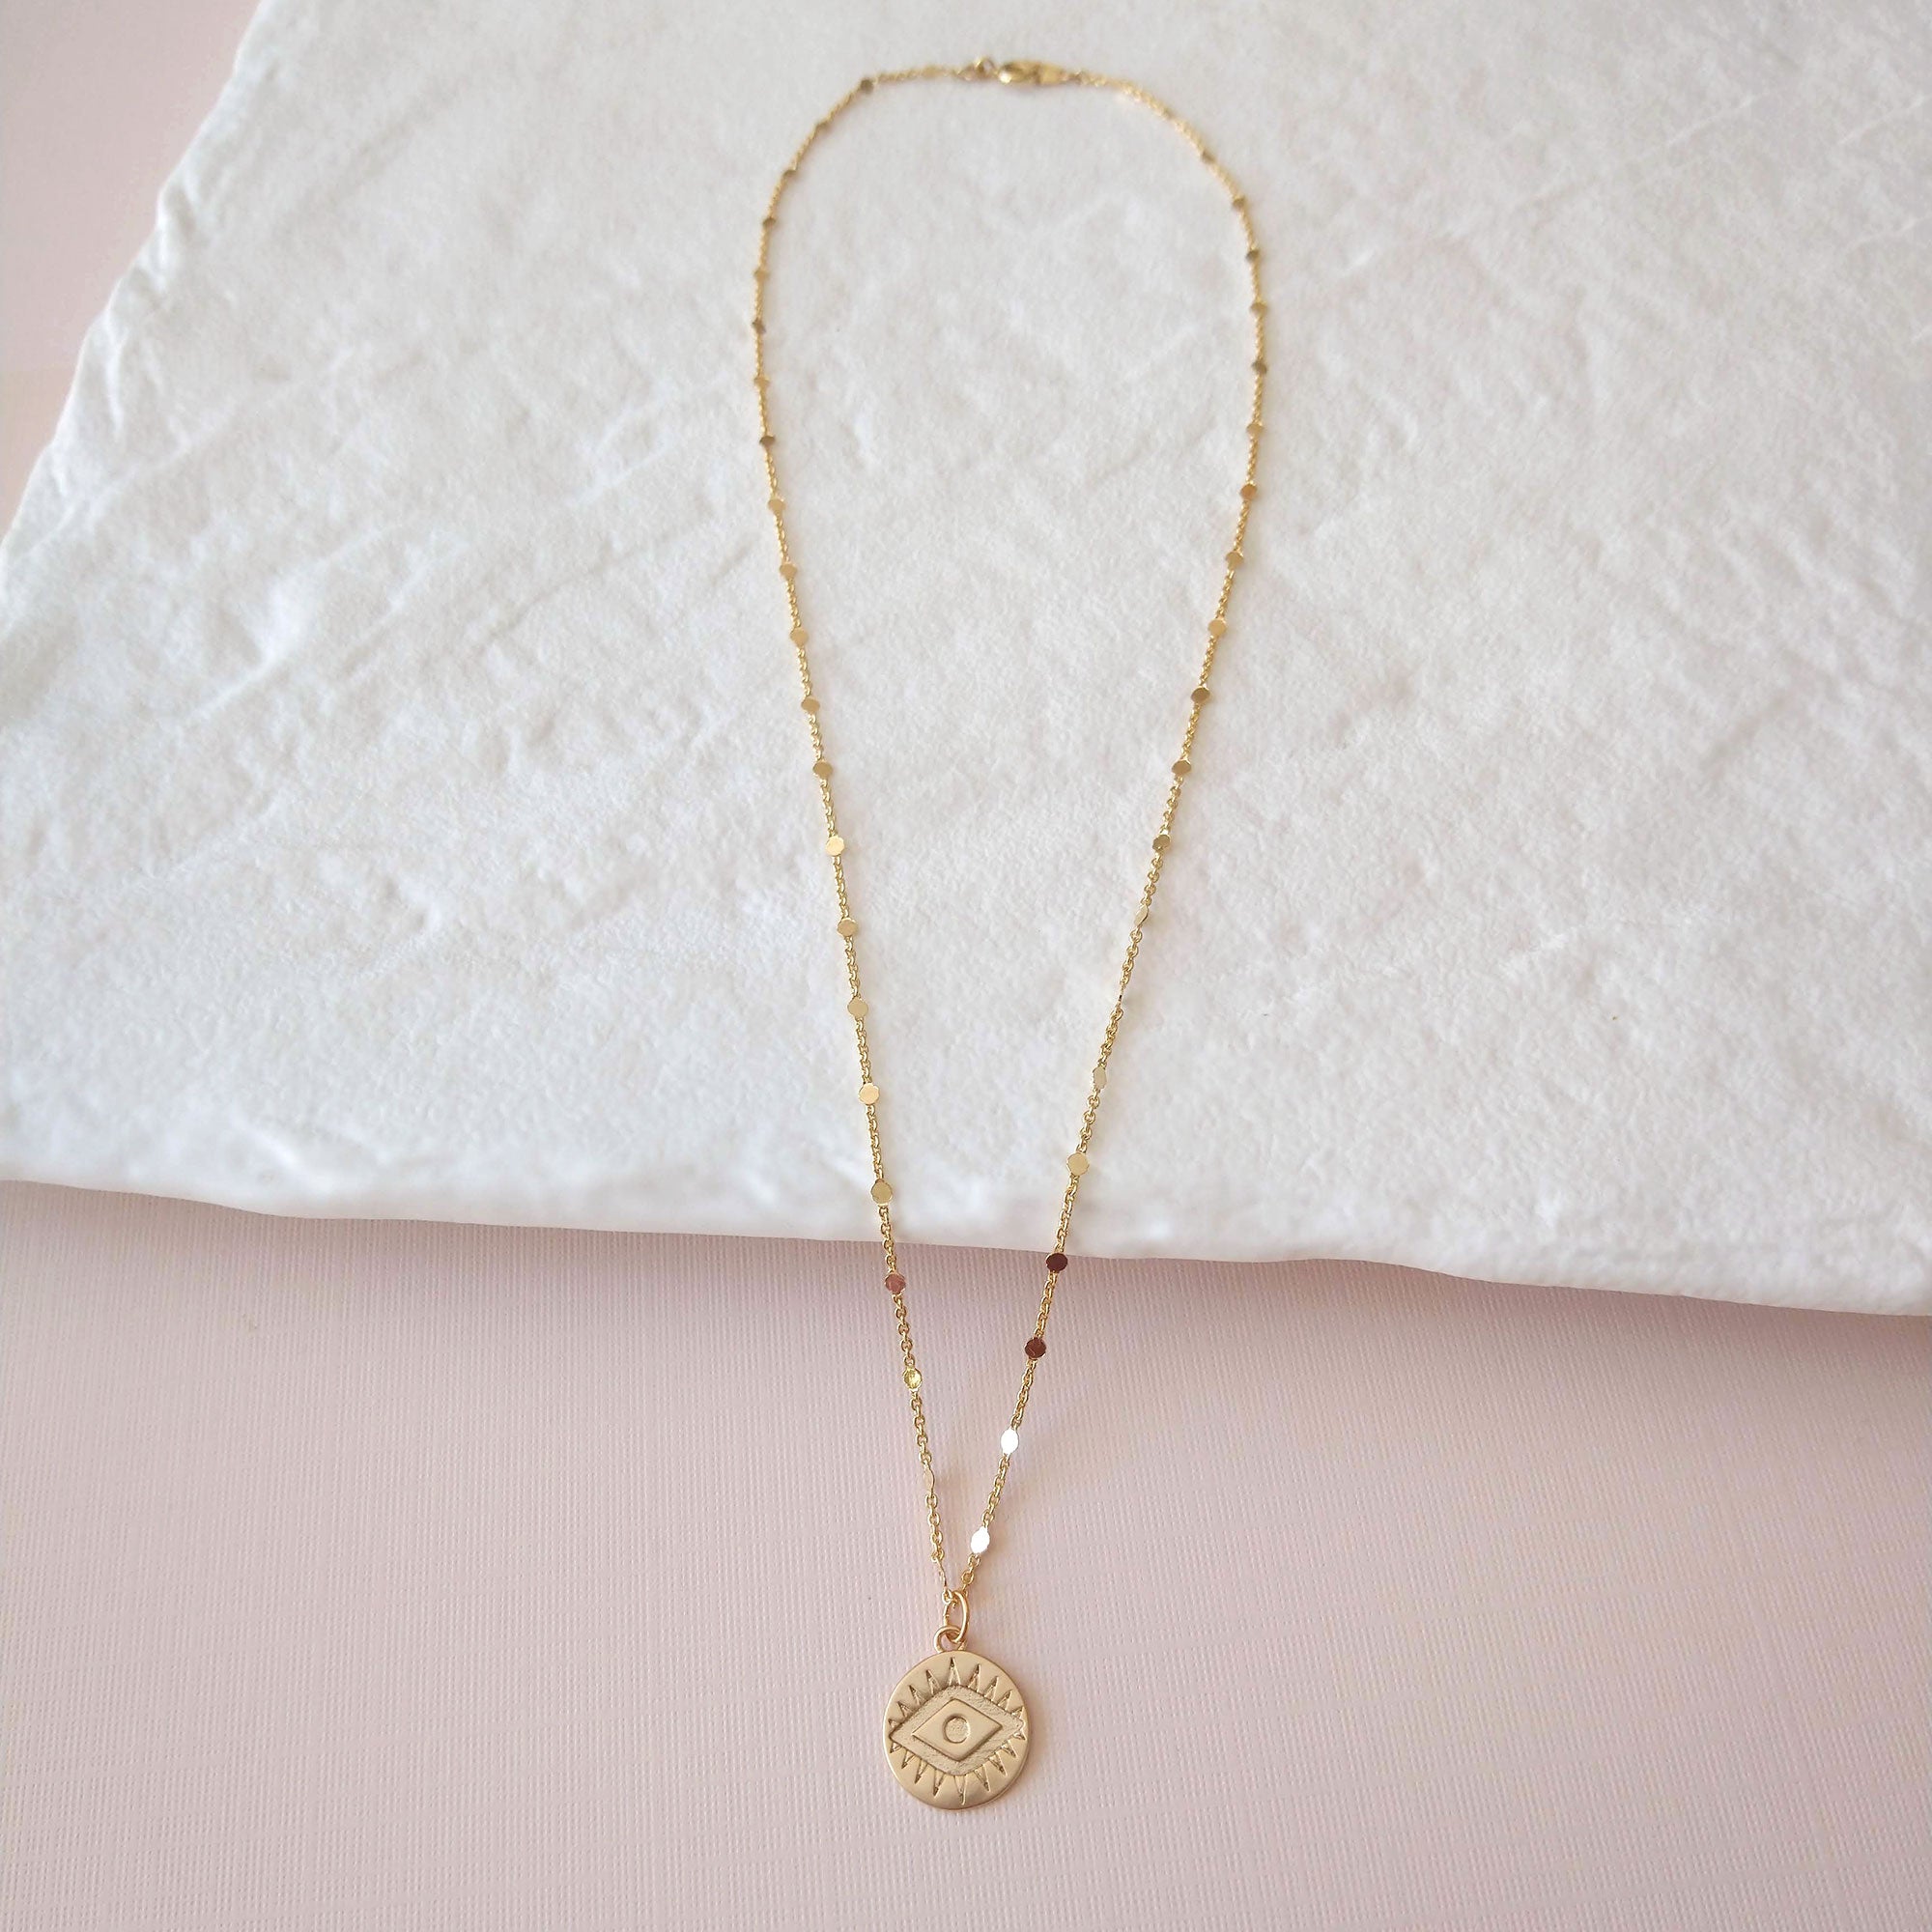 Evil eye charm necklace gold plated